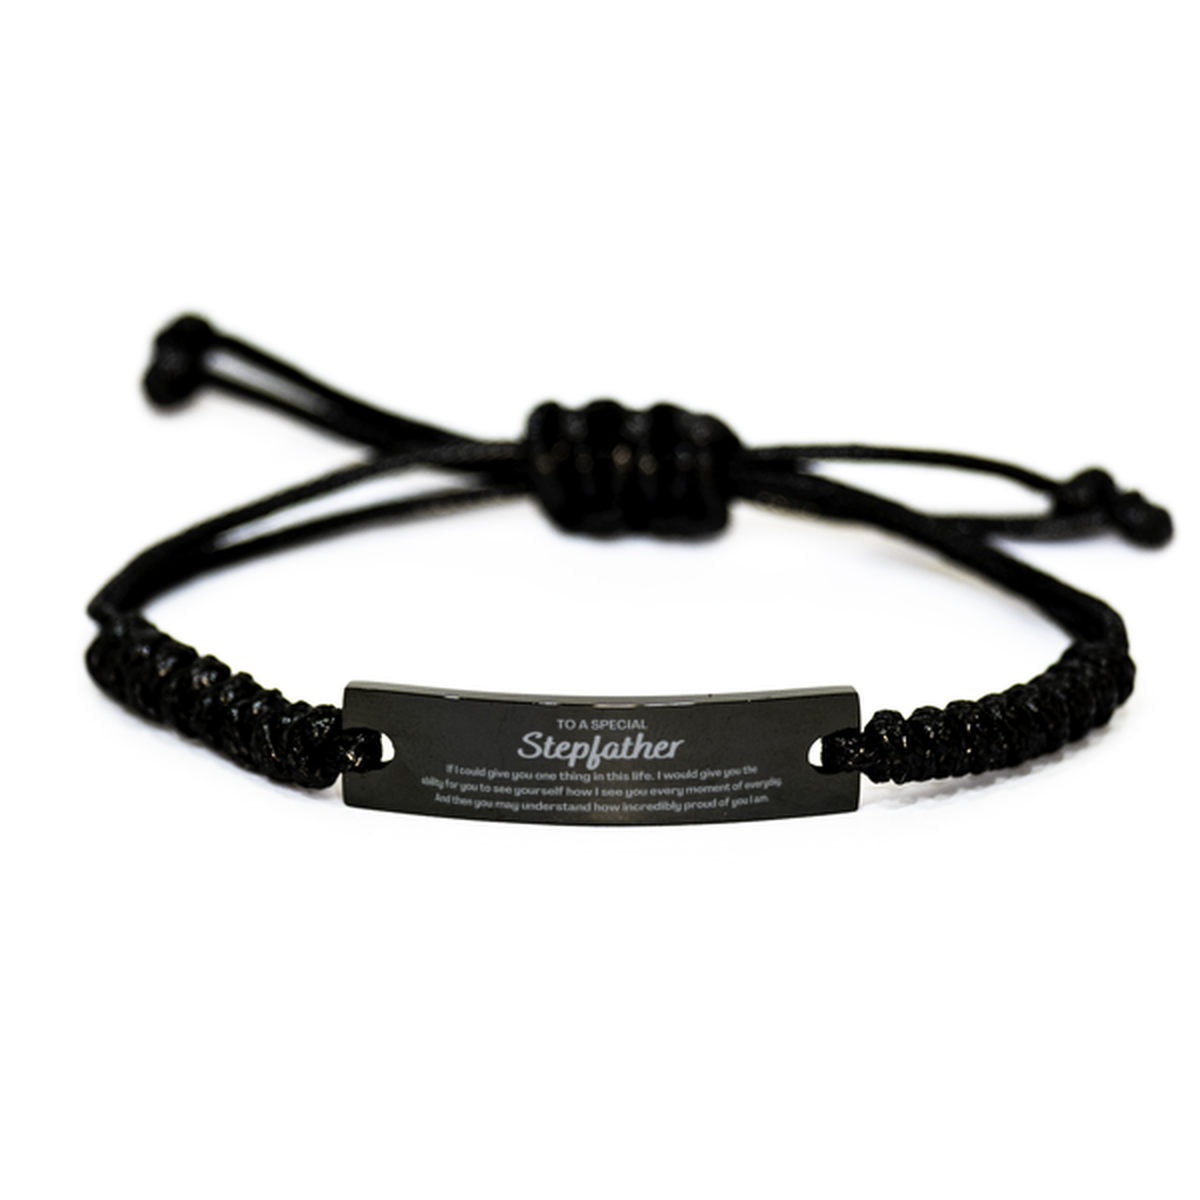 To My Stepfather Black Rope Bracelet, Gifts For Stepfather Engraved, Inspirational Gifts for Christmas Birthday, Epic Gifts for Stepfather To A Special Stepfather how incredibly proud of you I am